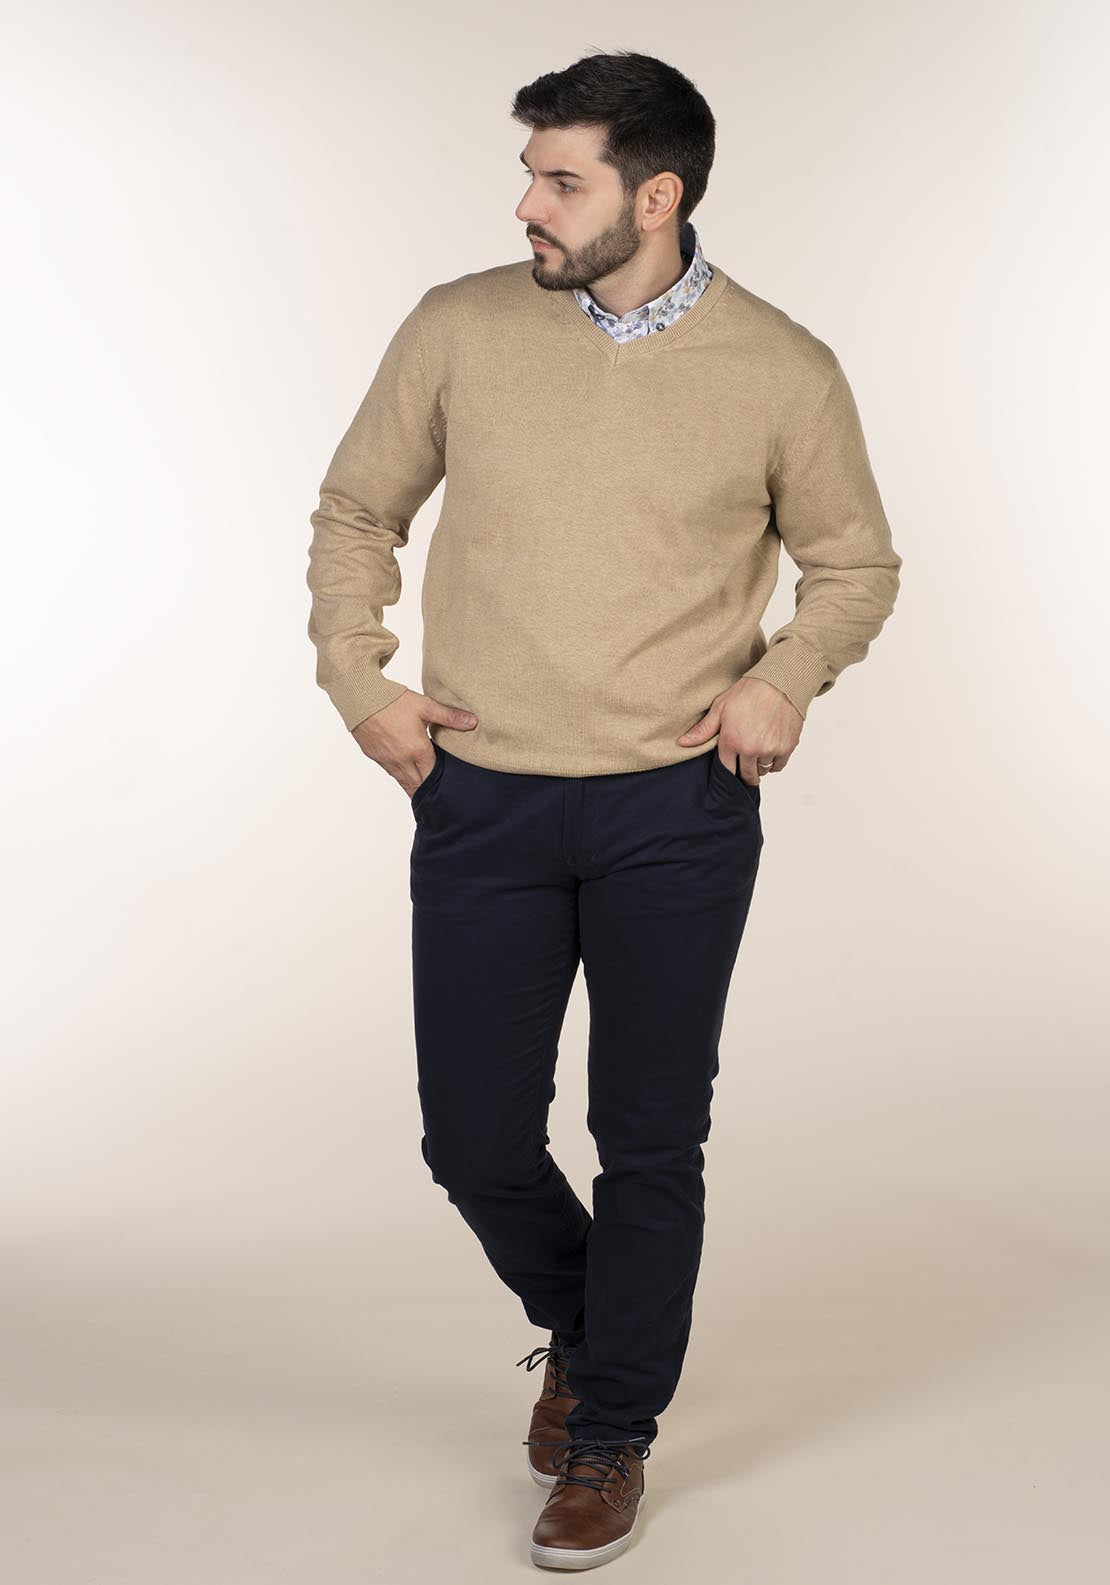 Yeats Plain Cotton V Neck Sweaters - Beige 1 Shaws Department Stores